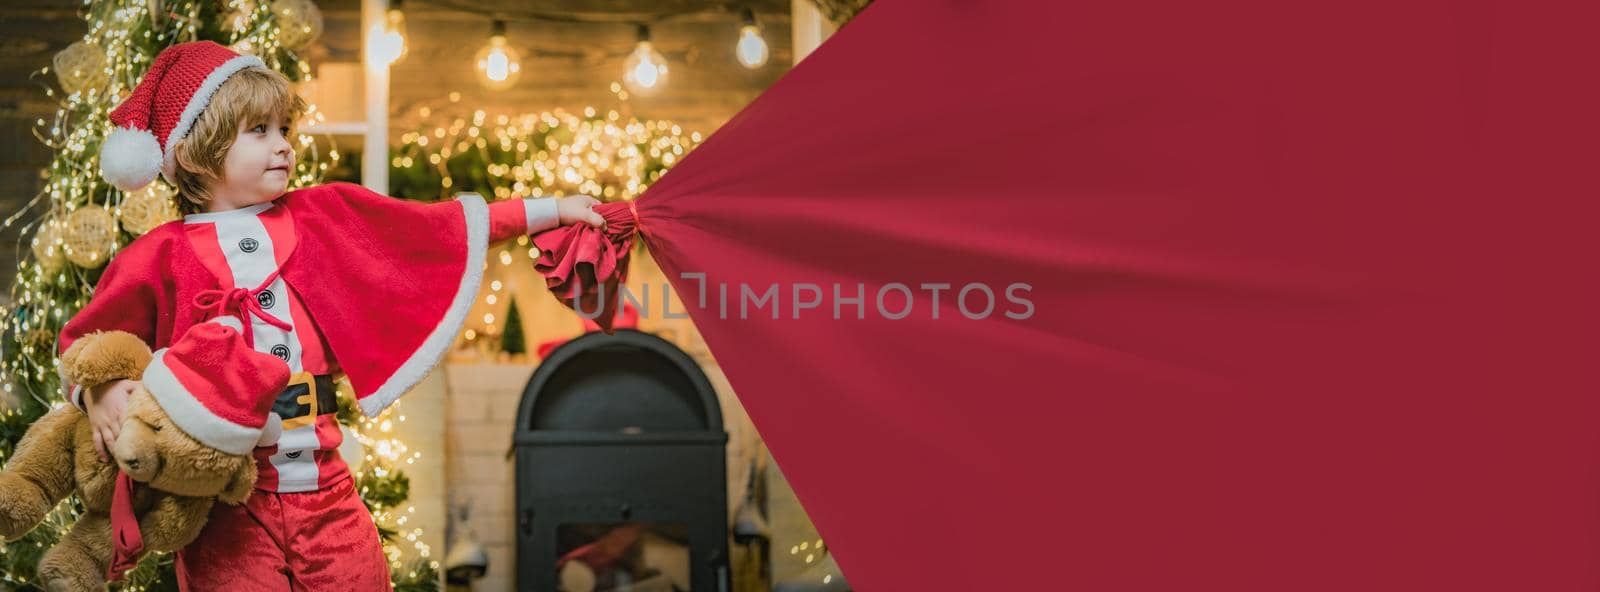 Santa child pulling huge bag of gifts, banner isolated on red background with copy space. Adorable child play with bag full of presents on christmas tree at home